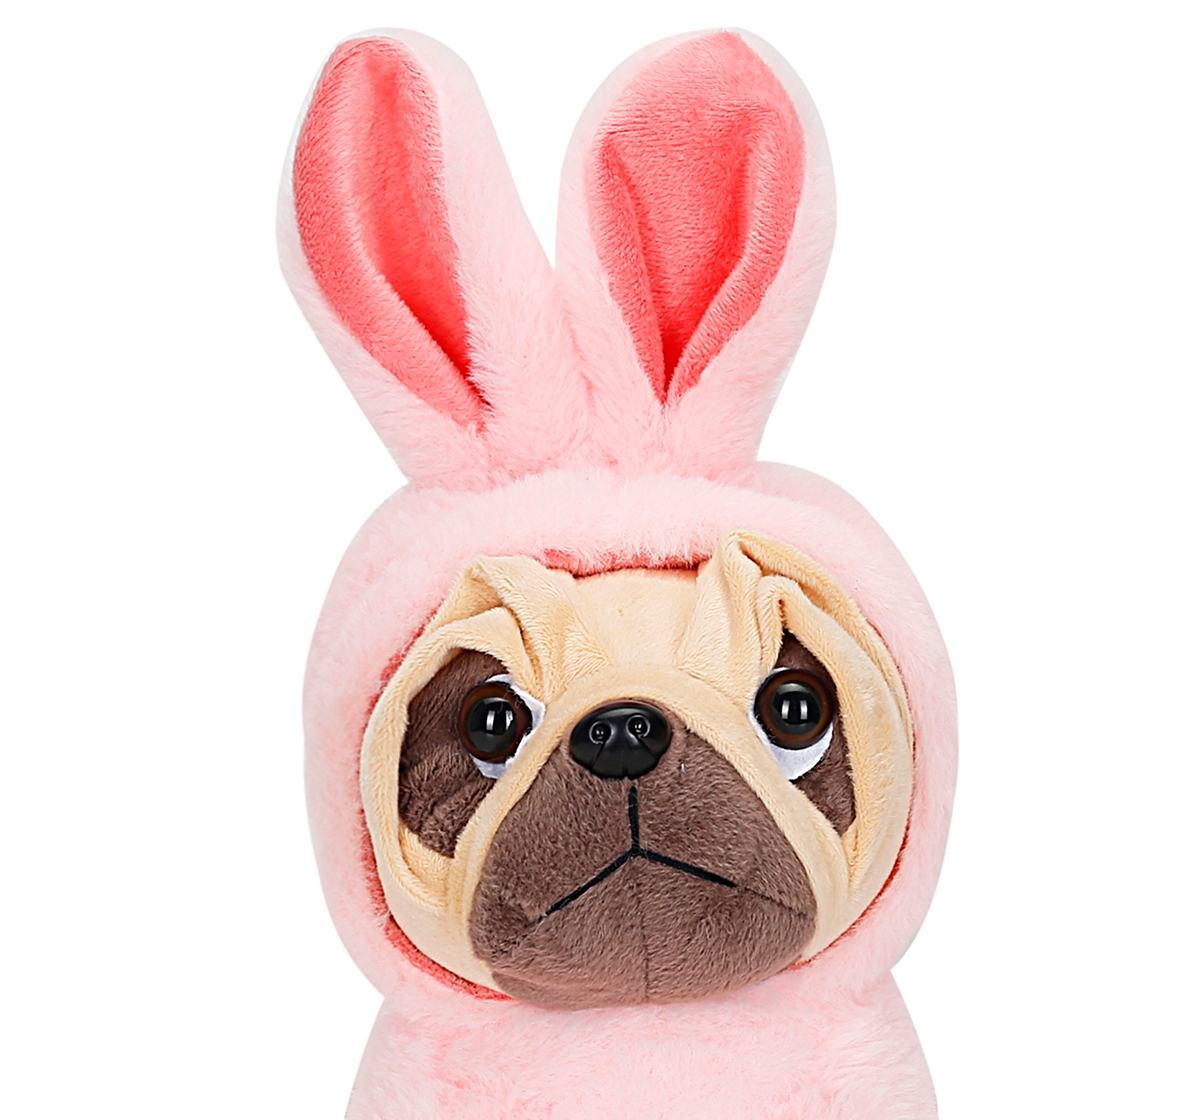 Fuzzbuzz 24Cm Pug With Bunny Hoodie Soft Toy for kids 3Y+, Multicolour